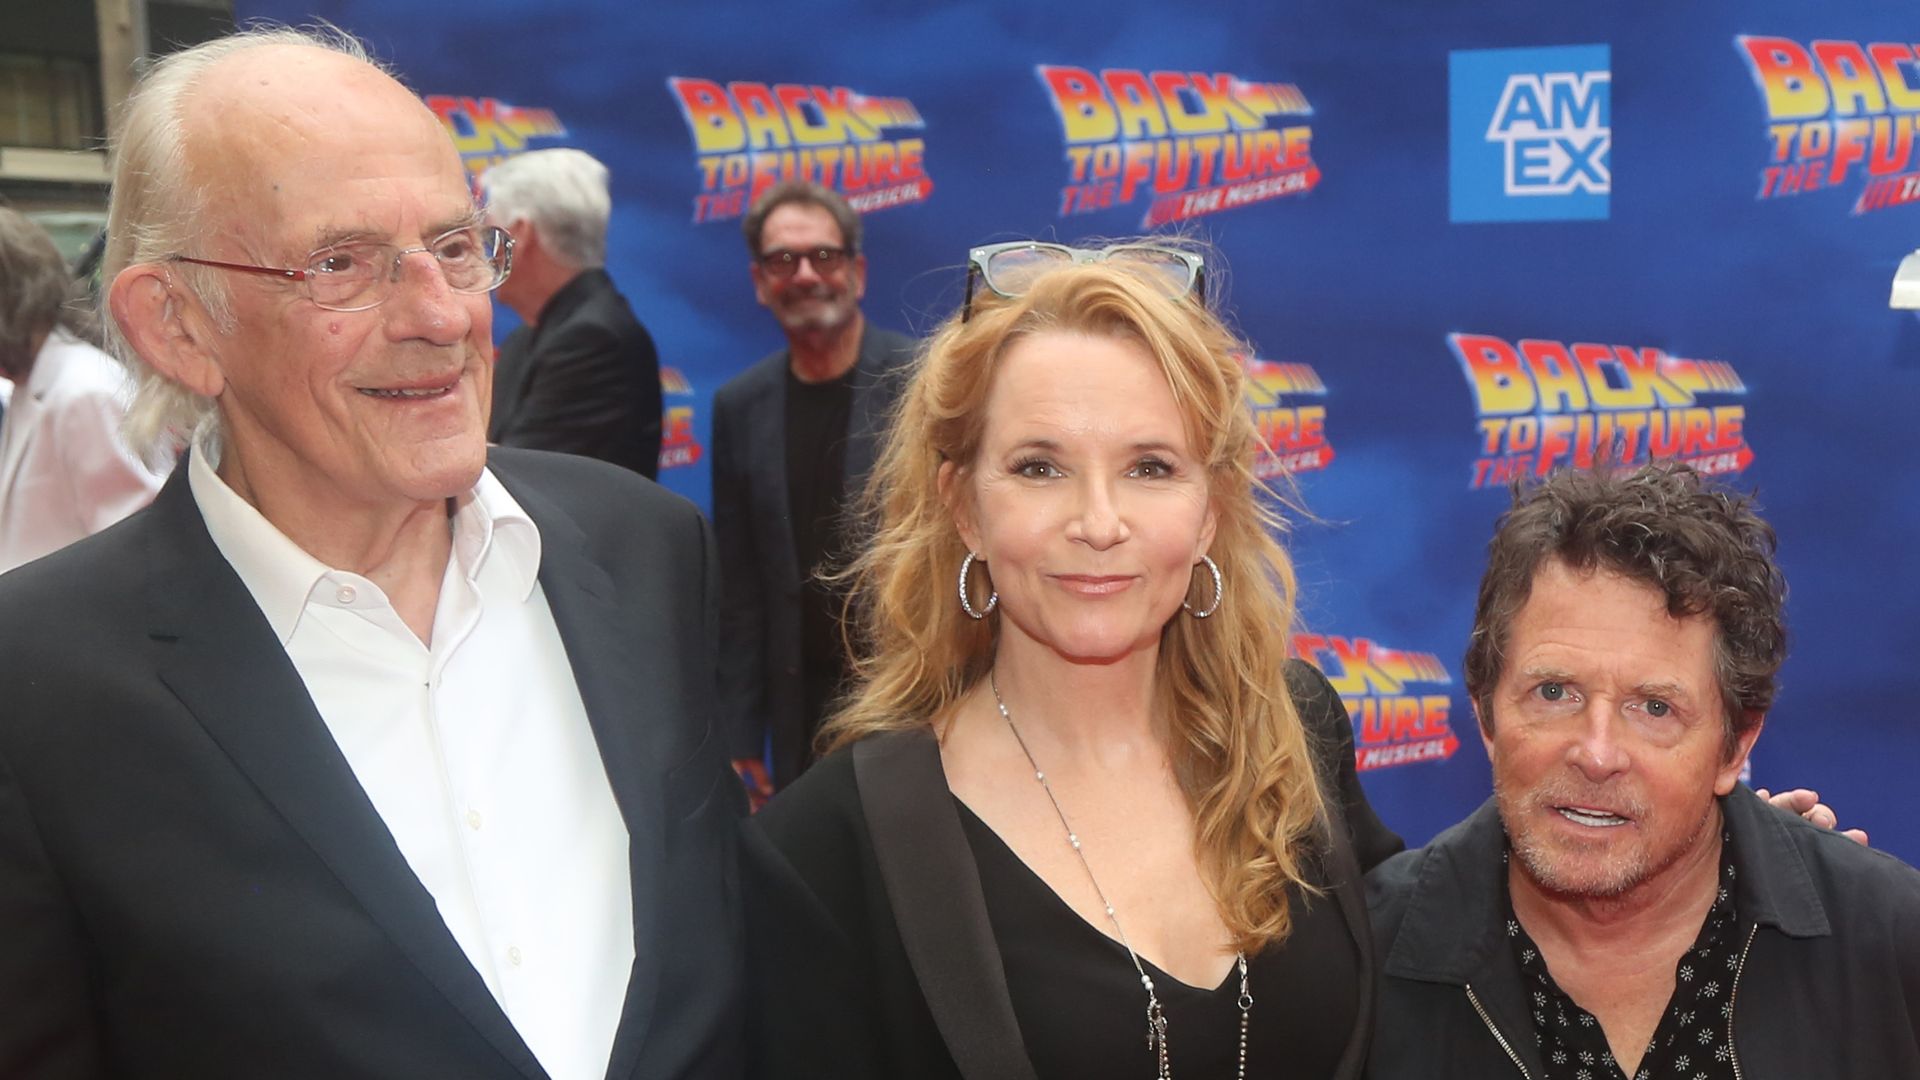 Christopher Lloyd, Lea Thompson and Michael J. Fox pose at the Michael J. Fox Foundation opening night gala performance "Back to the Future: The Musical" at The Winter Garden Theatre on July 25, 2023 in New York City